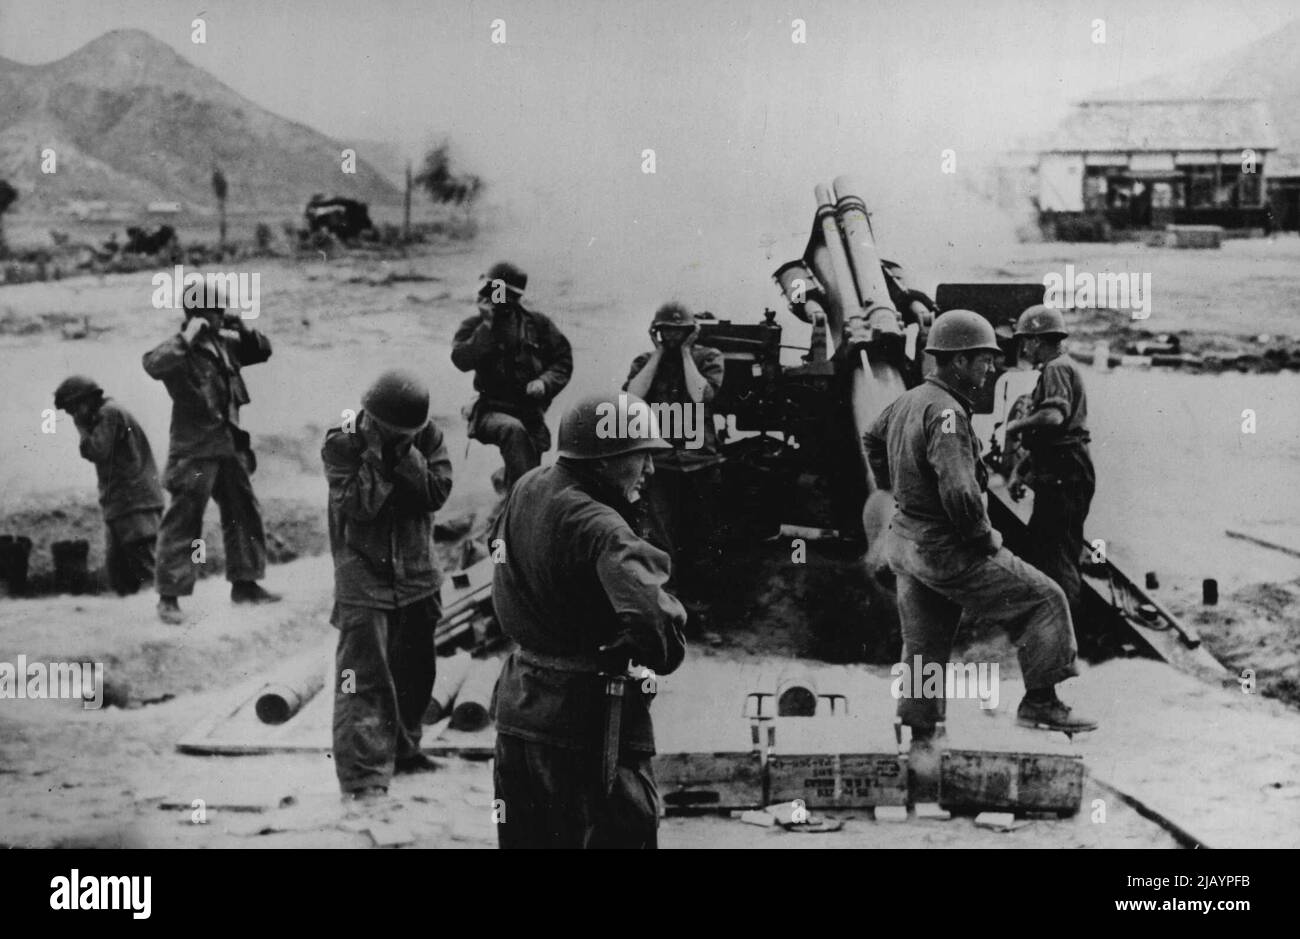 In Action In Korea: Men of a 155mm Howitzer crew hold their ears as their gun goes into action in the fight to push back the North Koreans. A front line picture from 'somewhere in Korea'. August 10, 1950. (Photo by Paul Popper Ltd.). Stock Photo